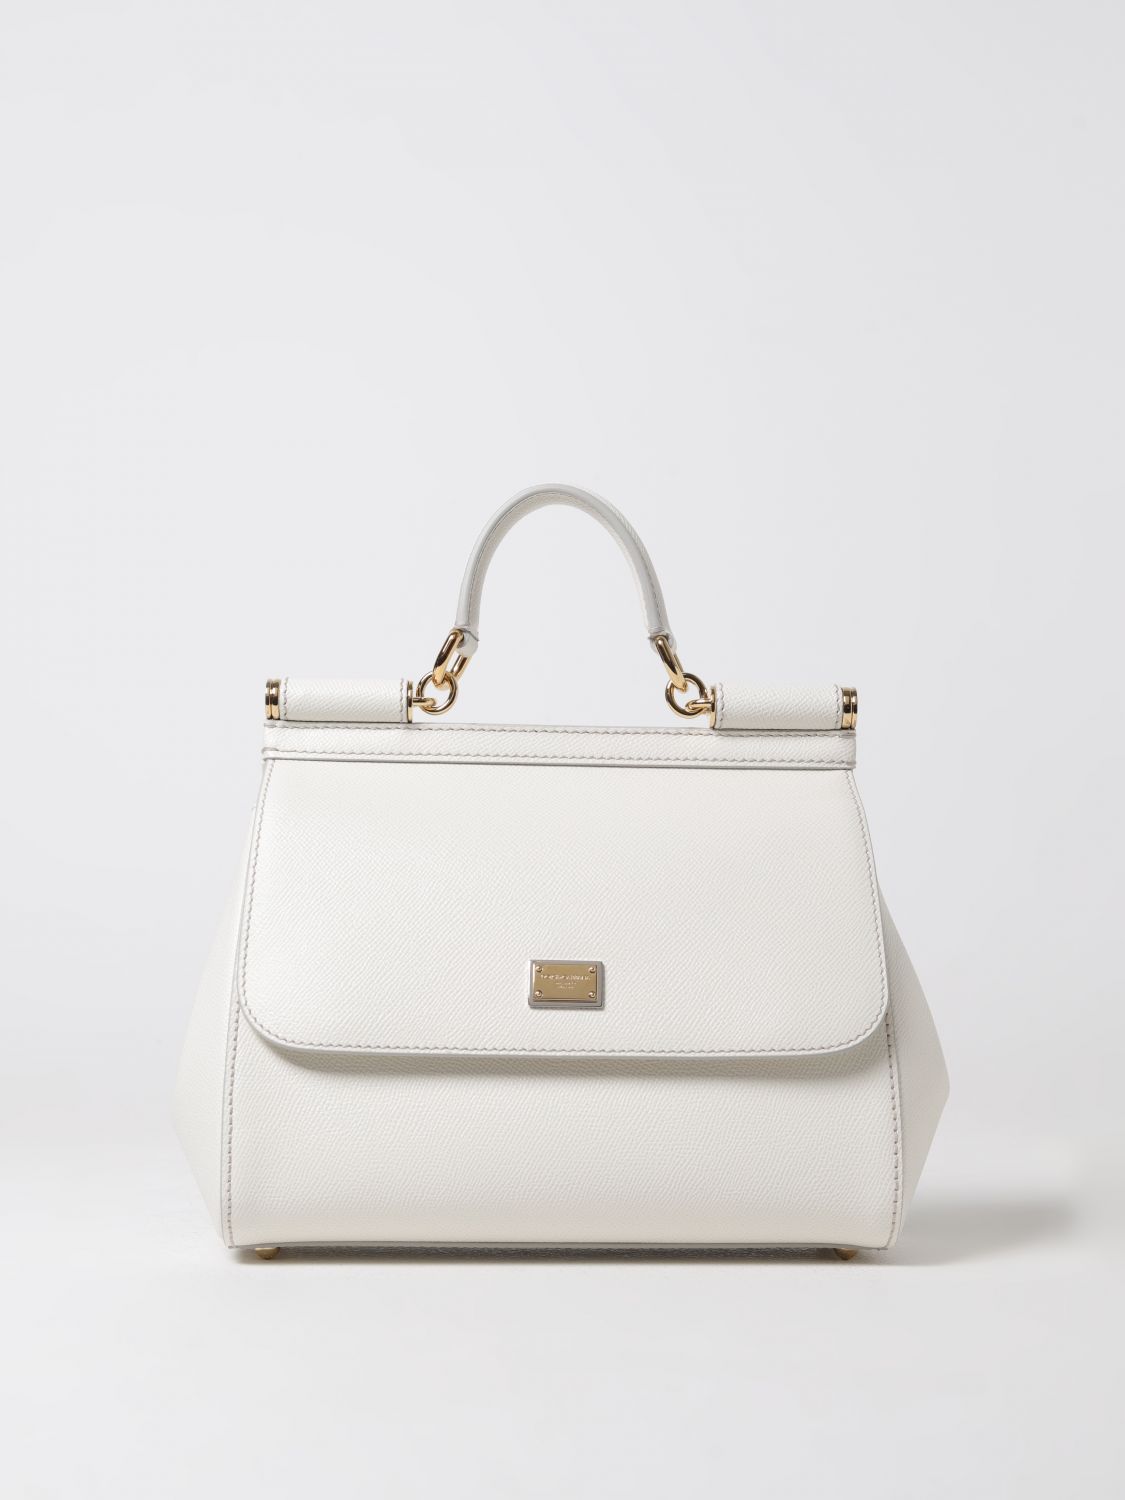 Dolce & Gabbana Sicily Bag In Micro Grained Leather In White